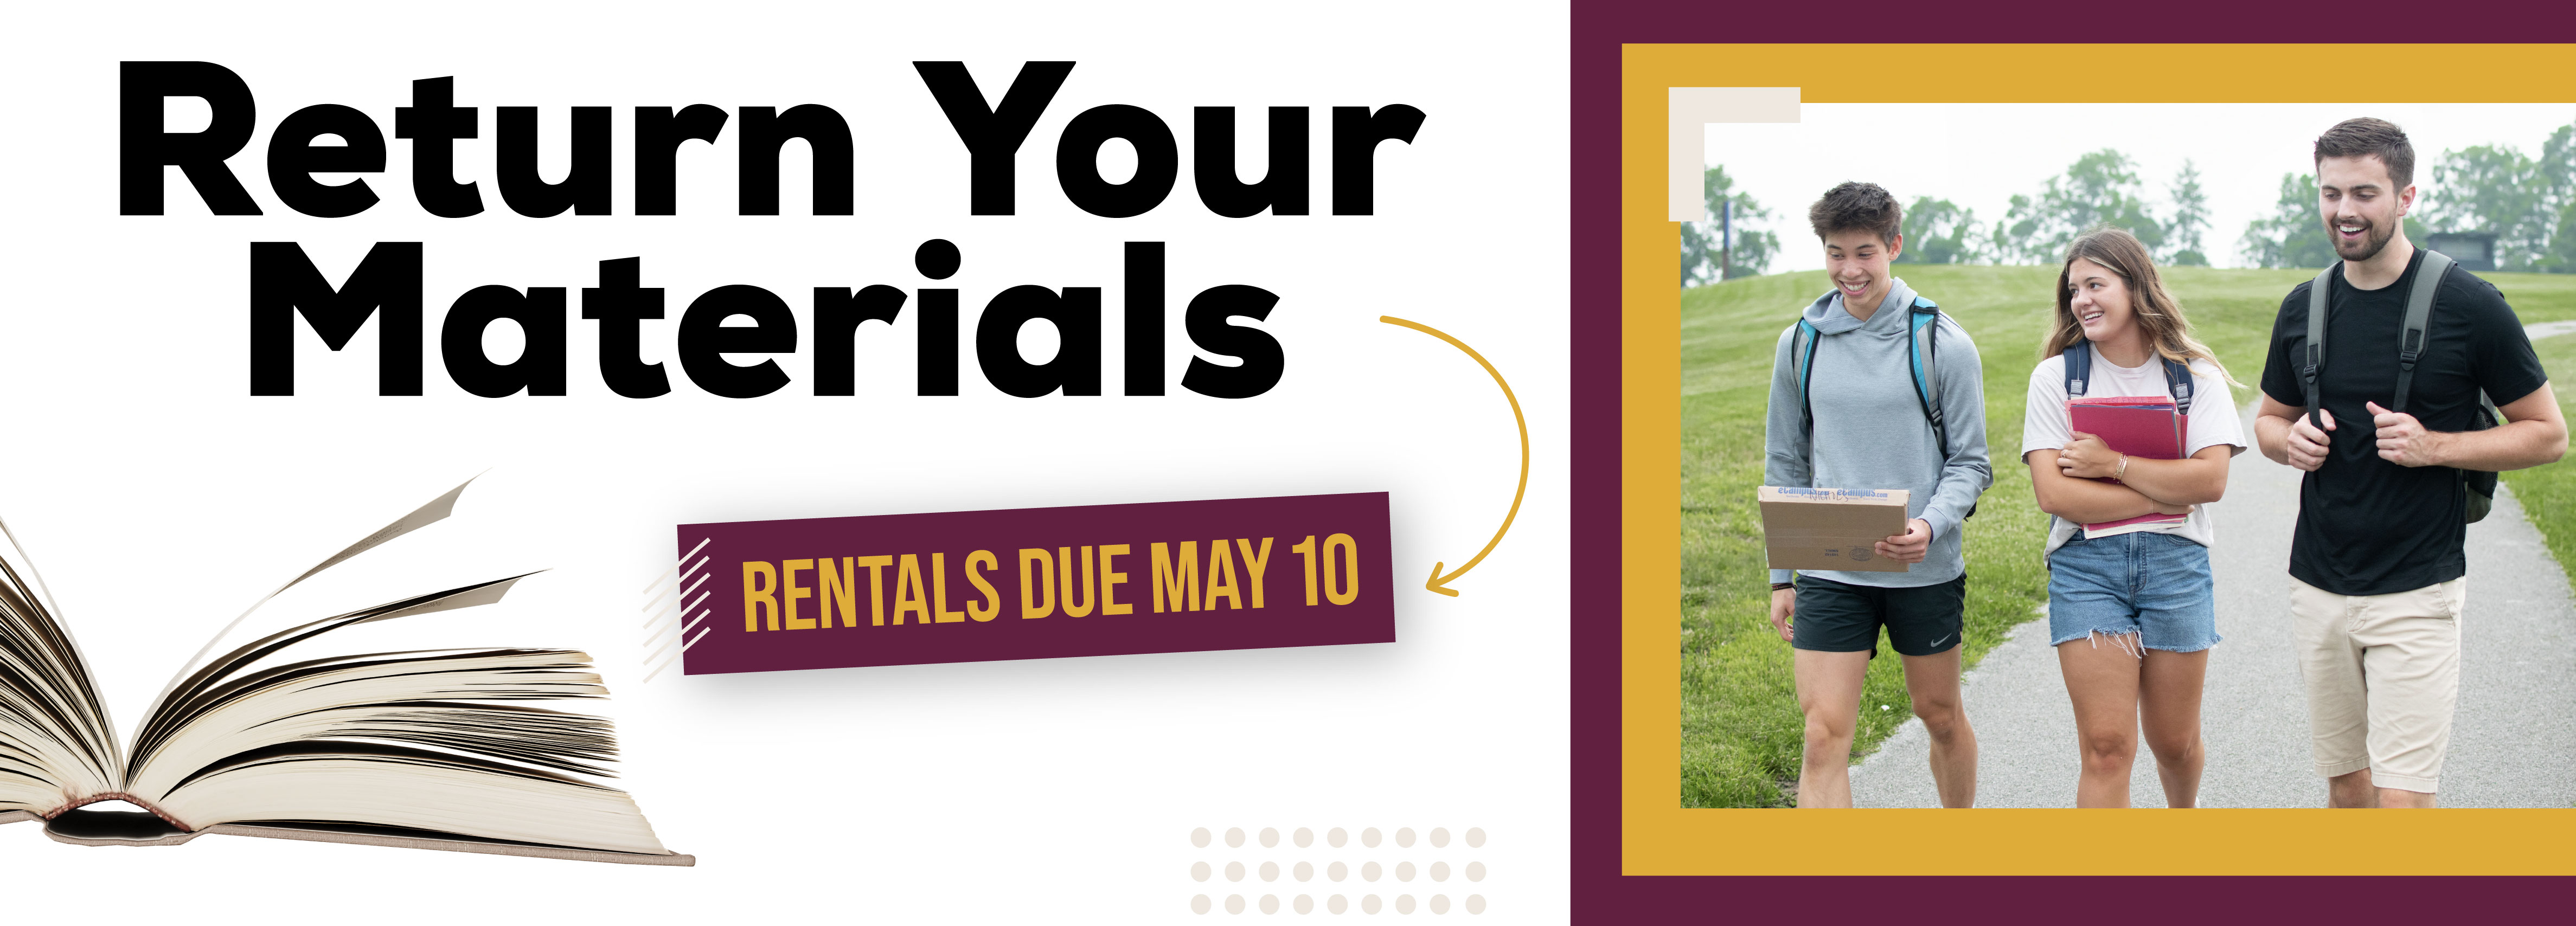 Return Your Materials Rental due May 10